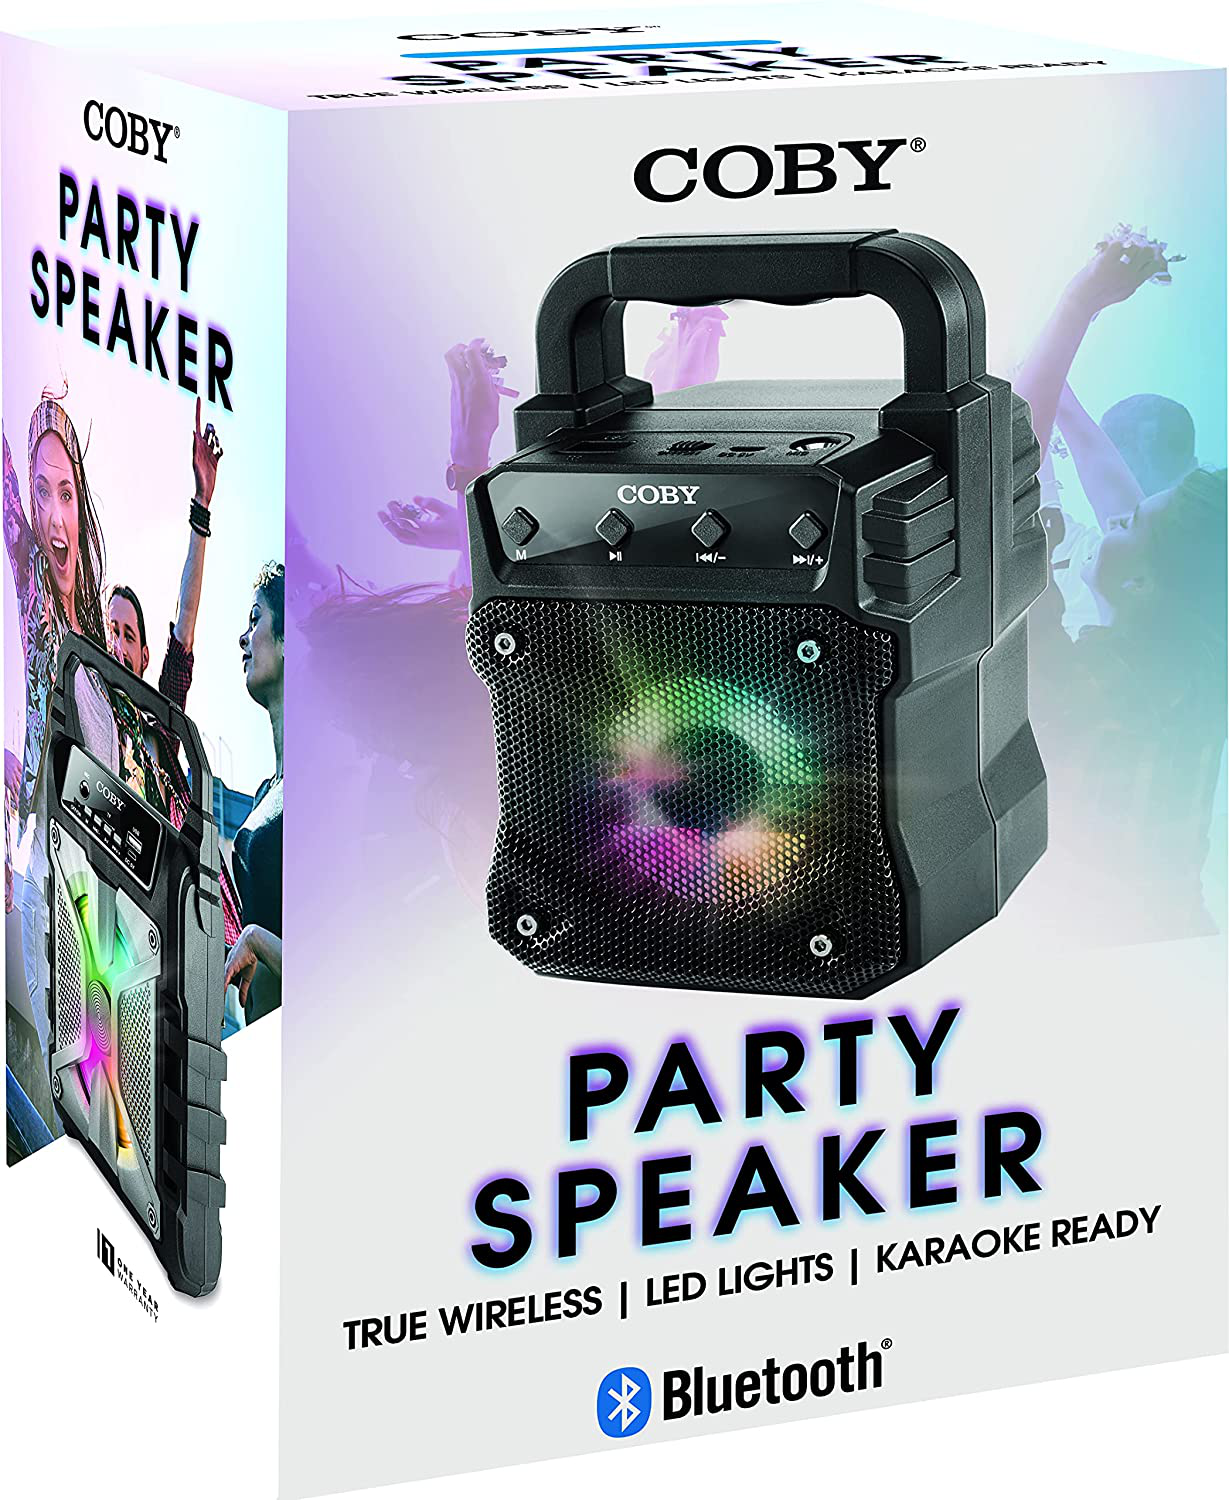 Coby Portable Bluetooth Speaker | Wireless PA System with FM Radio | Microphone Input | Karaoke Machine with Lights | Perfect for Kids Adults Outdoors